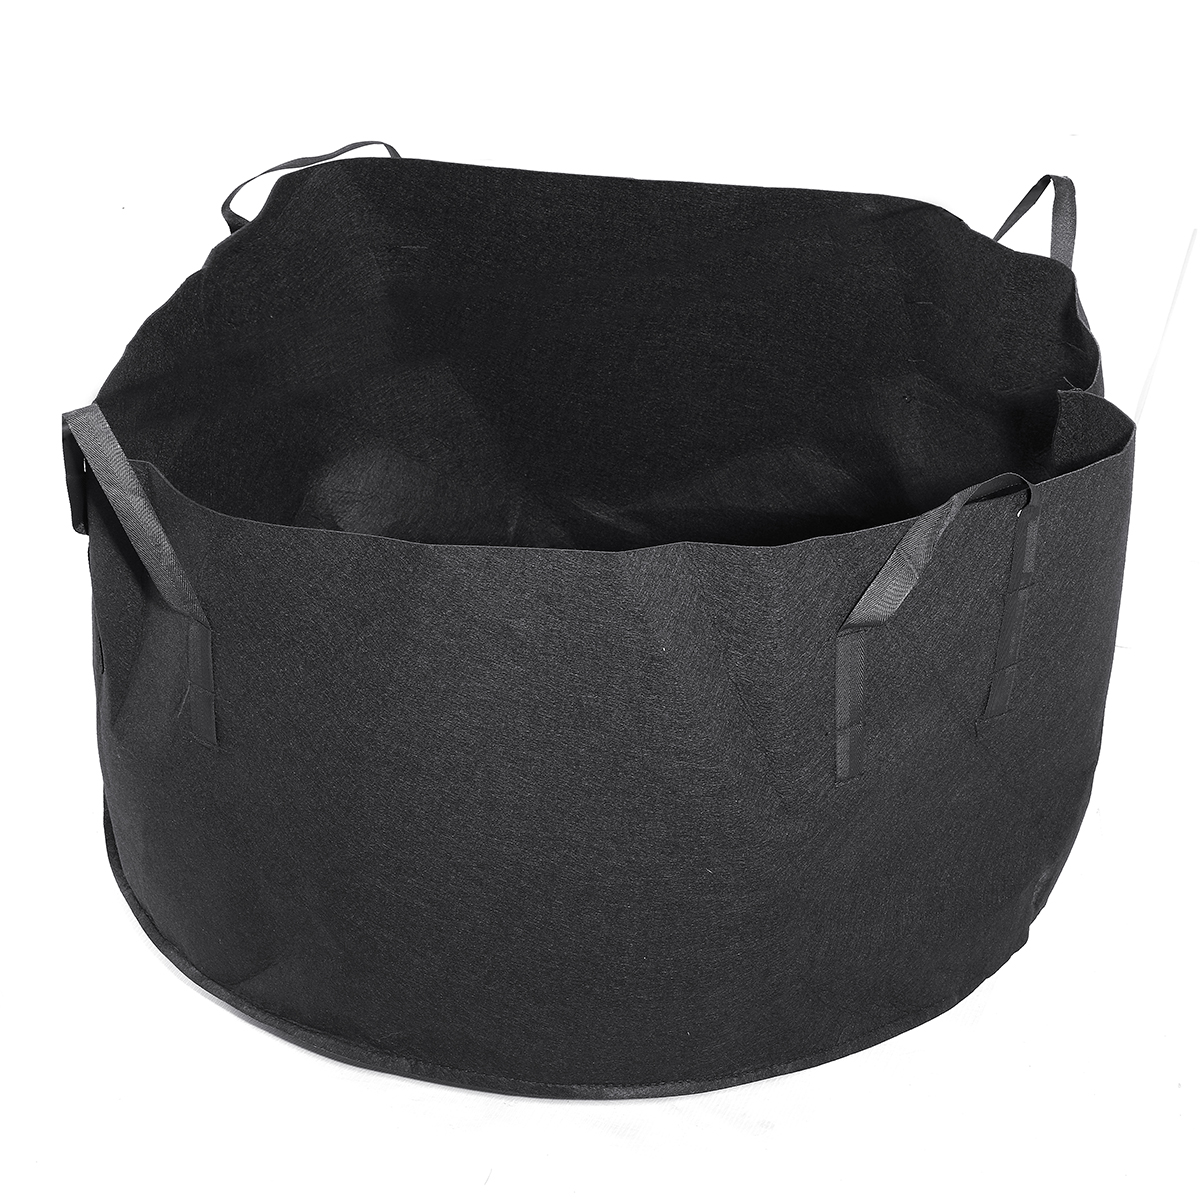 Find 1-100Gallon Potato Planting Bag Pot Planter Growing Garden Vegetable Container for Sale on Gipsybee.com with cryptocurrencies